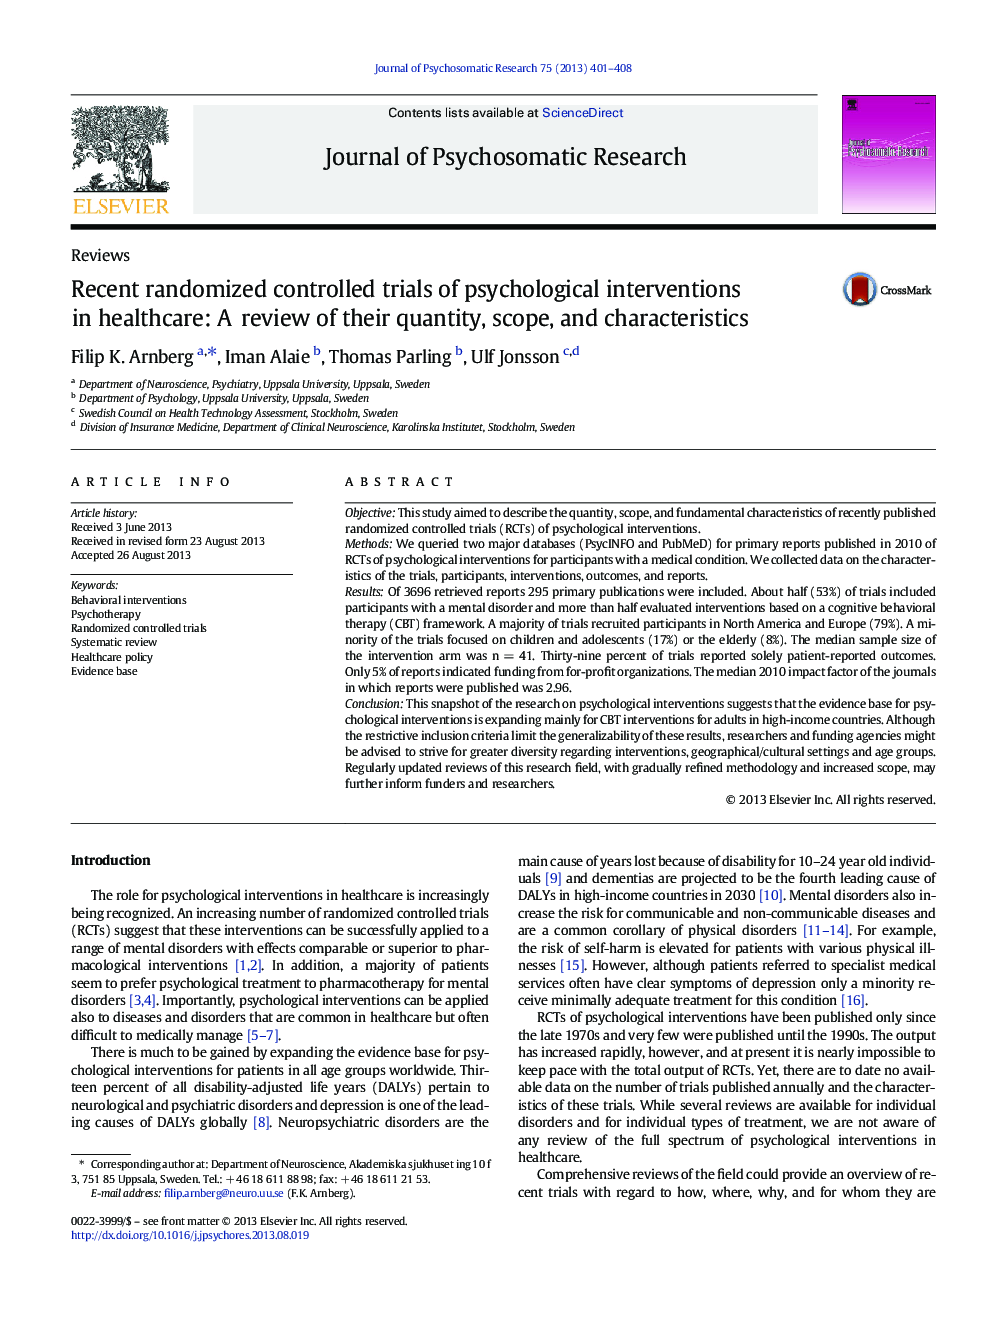 Recent randomized controlled trials of psychological interventions in healthcare: A review of their quantity, scope, and characteristics